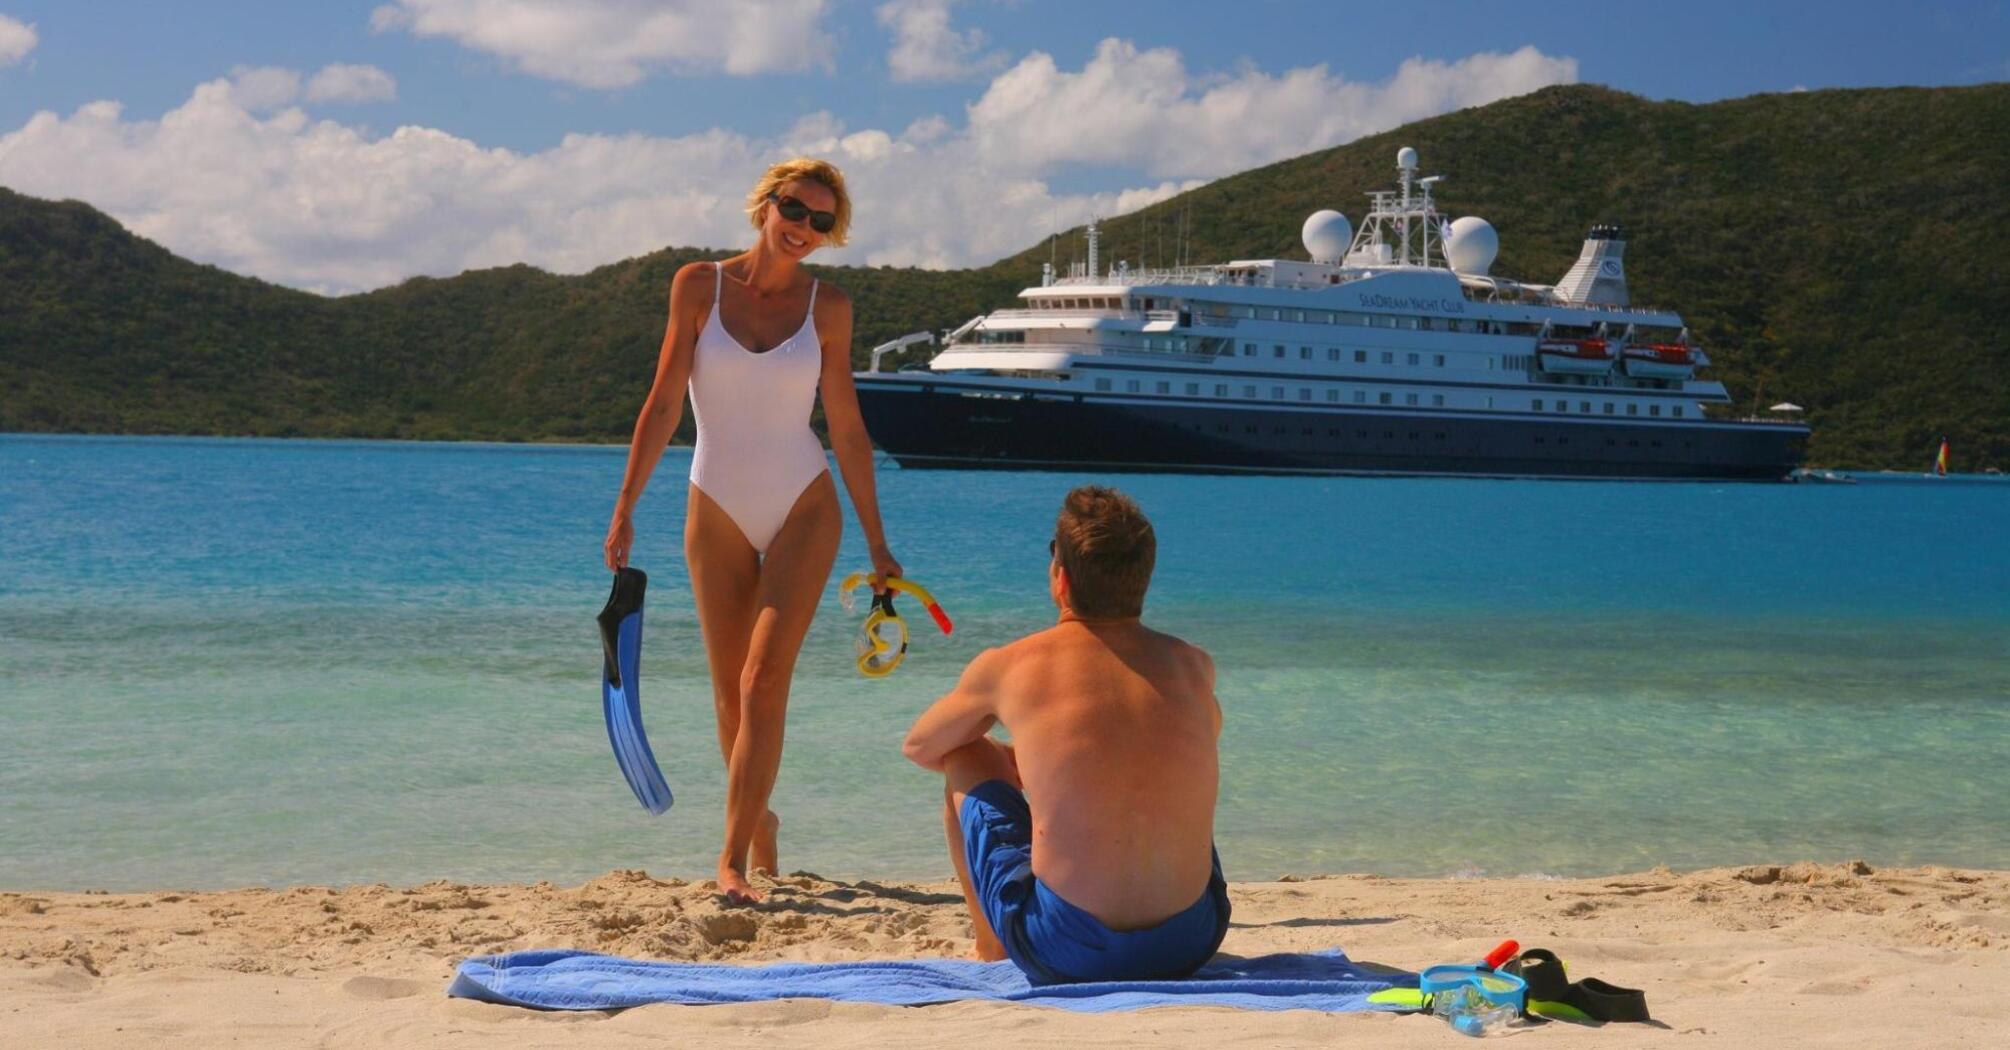 A married couple relaxes on the shore with a cruise ship in the background